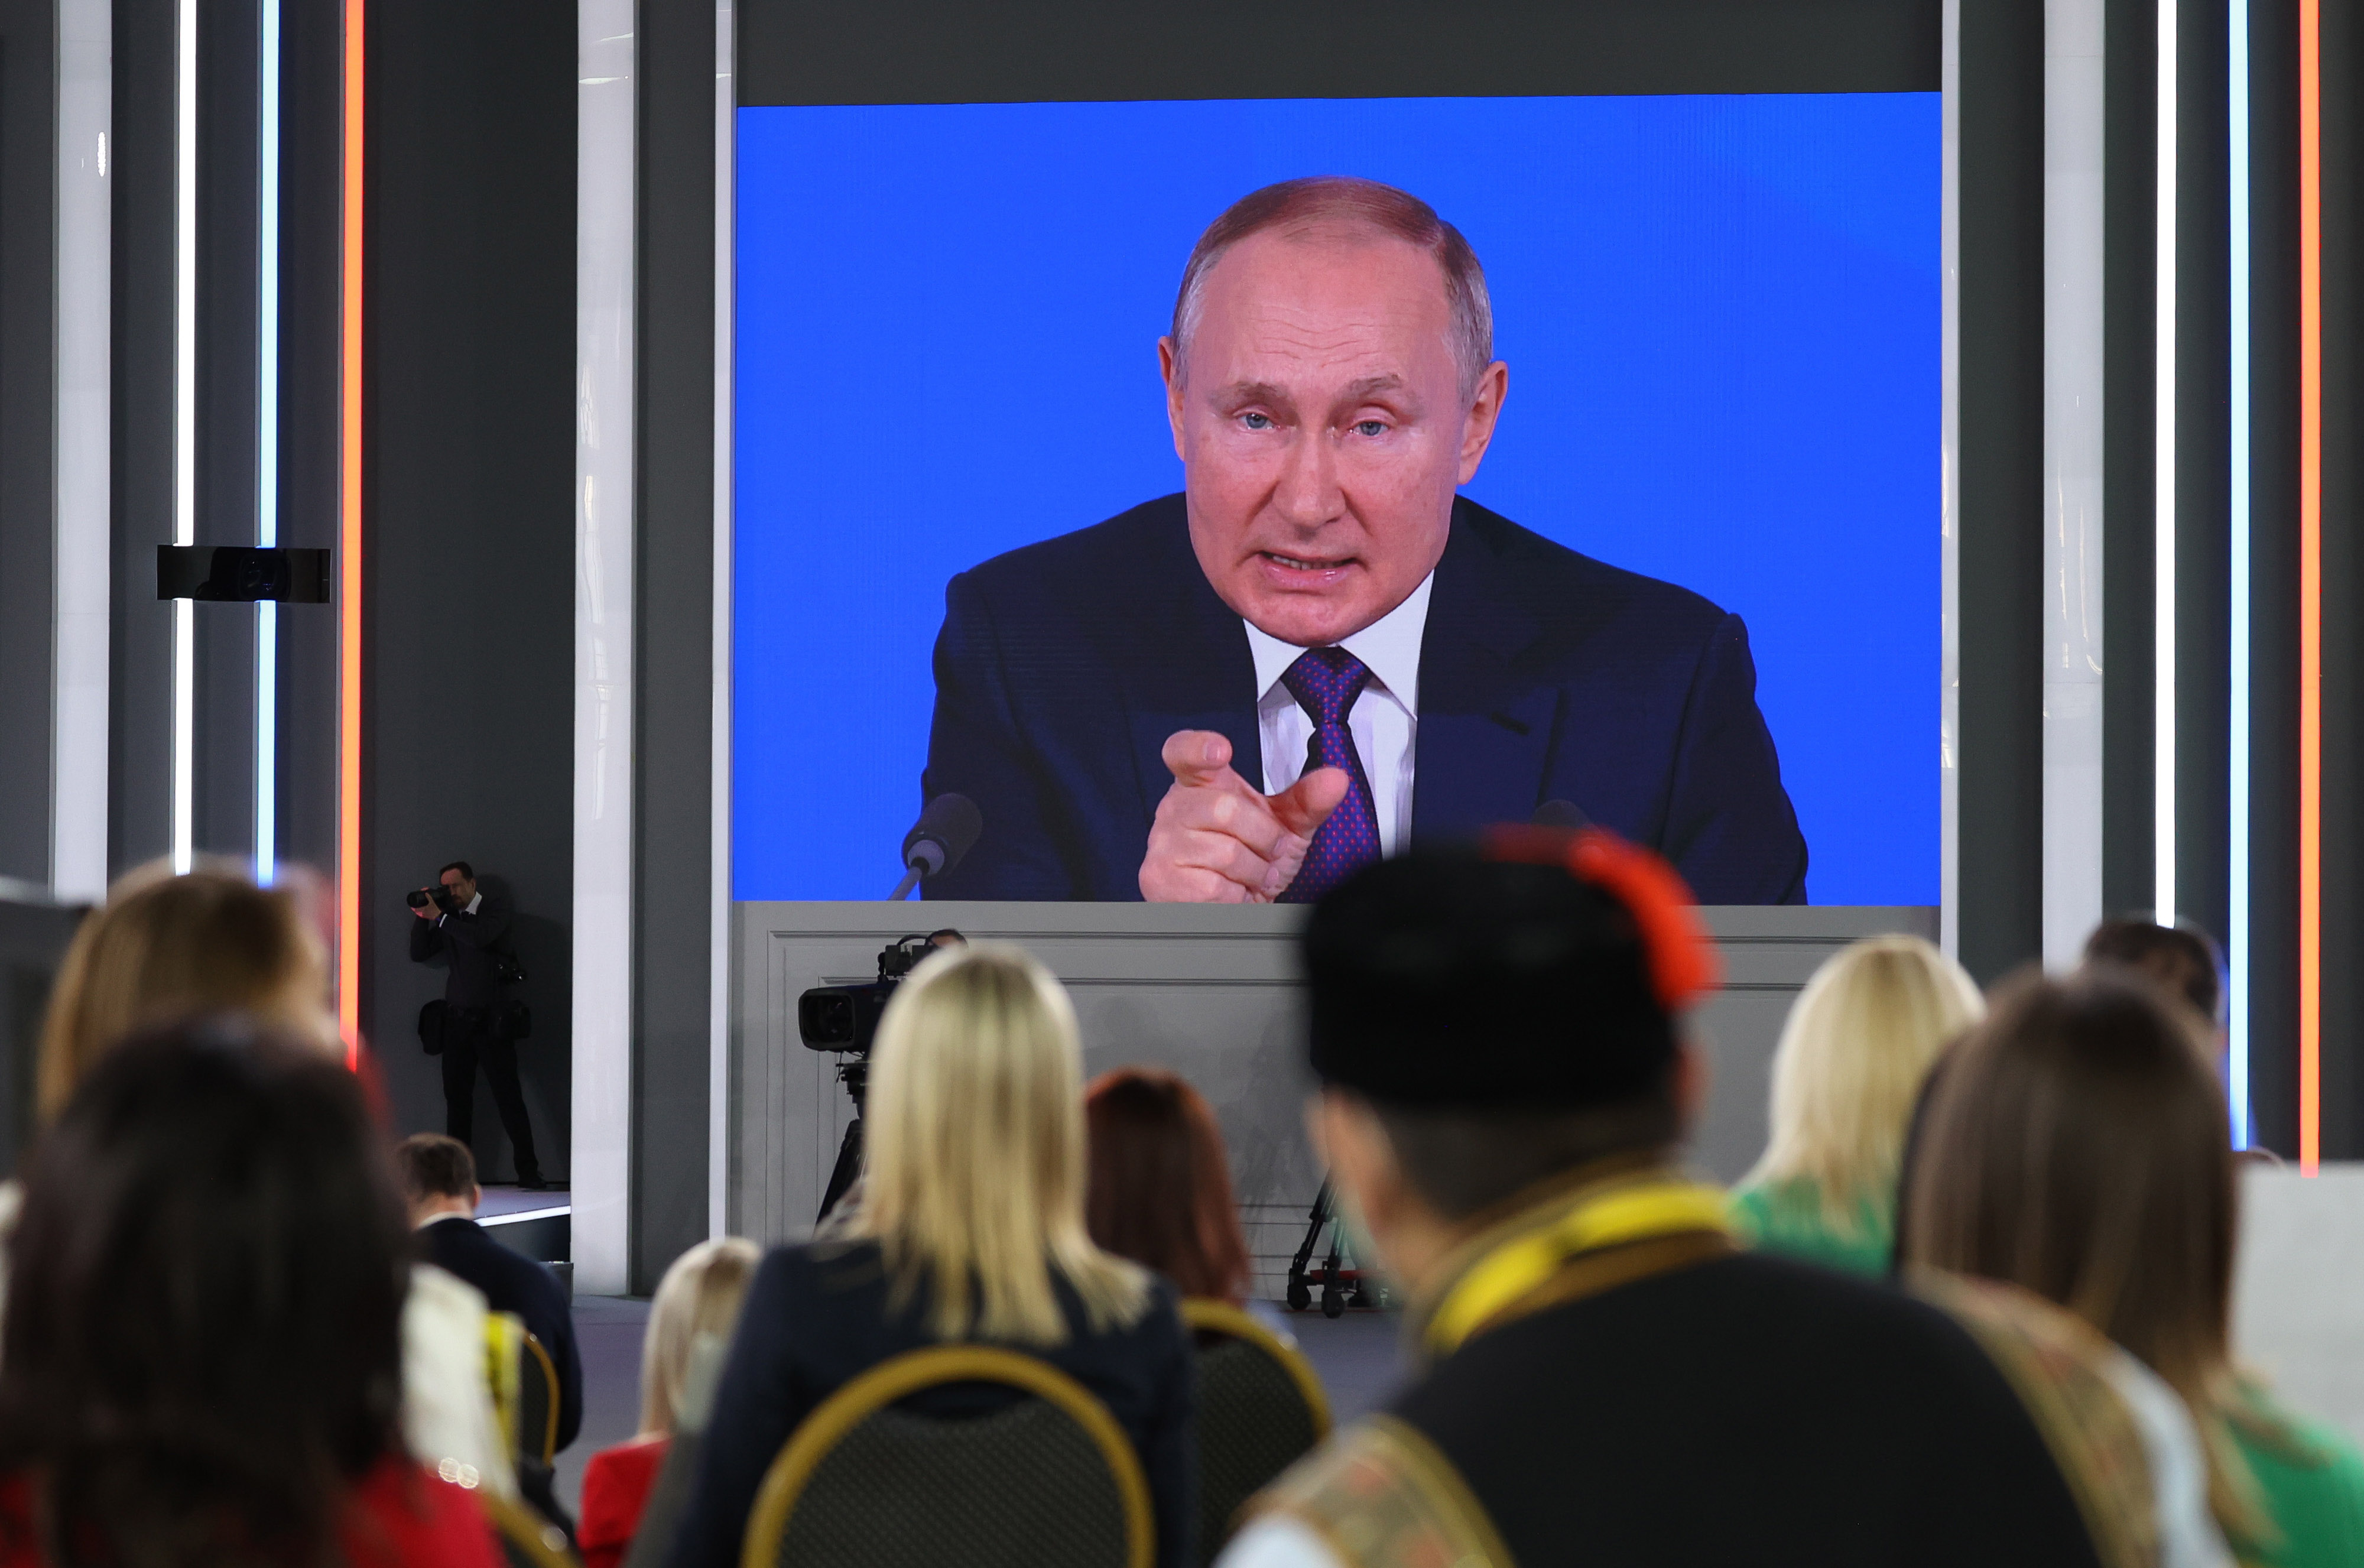 Attendees watch Vladimir Putin during his annual news conference in Moscow on Dec. 23, 2021.&nbsp;